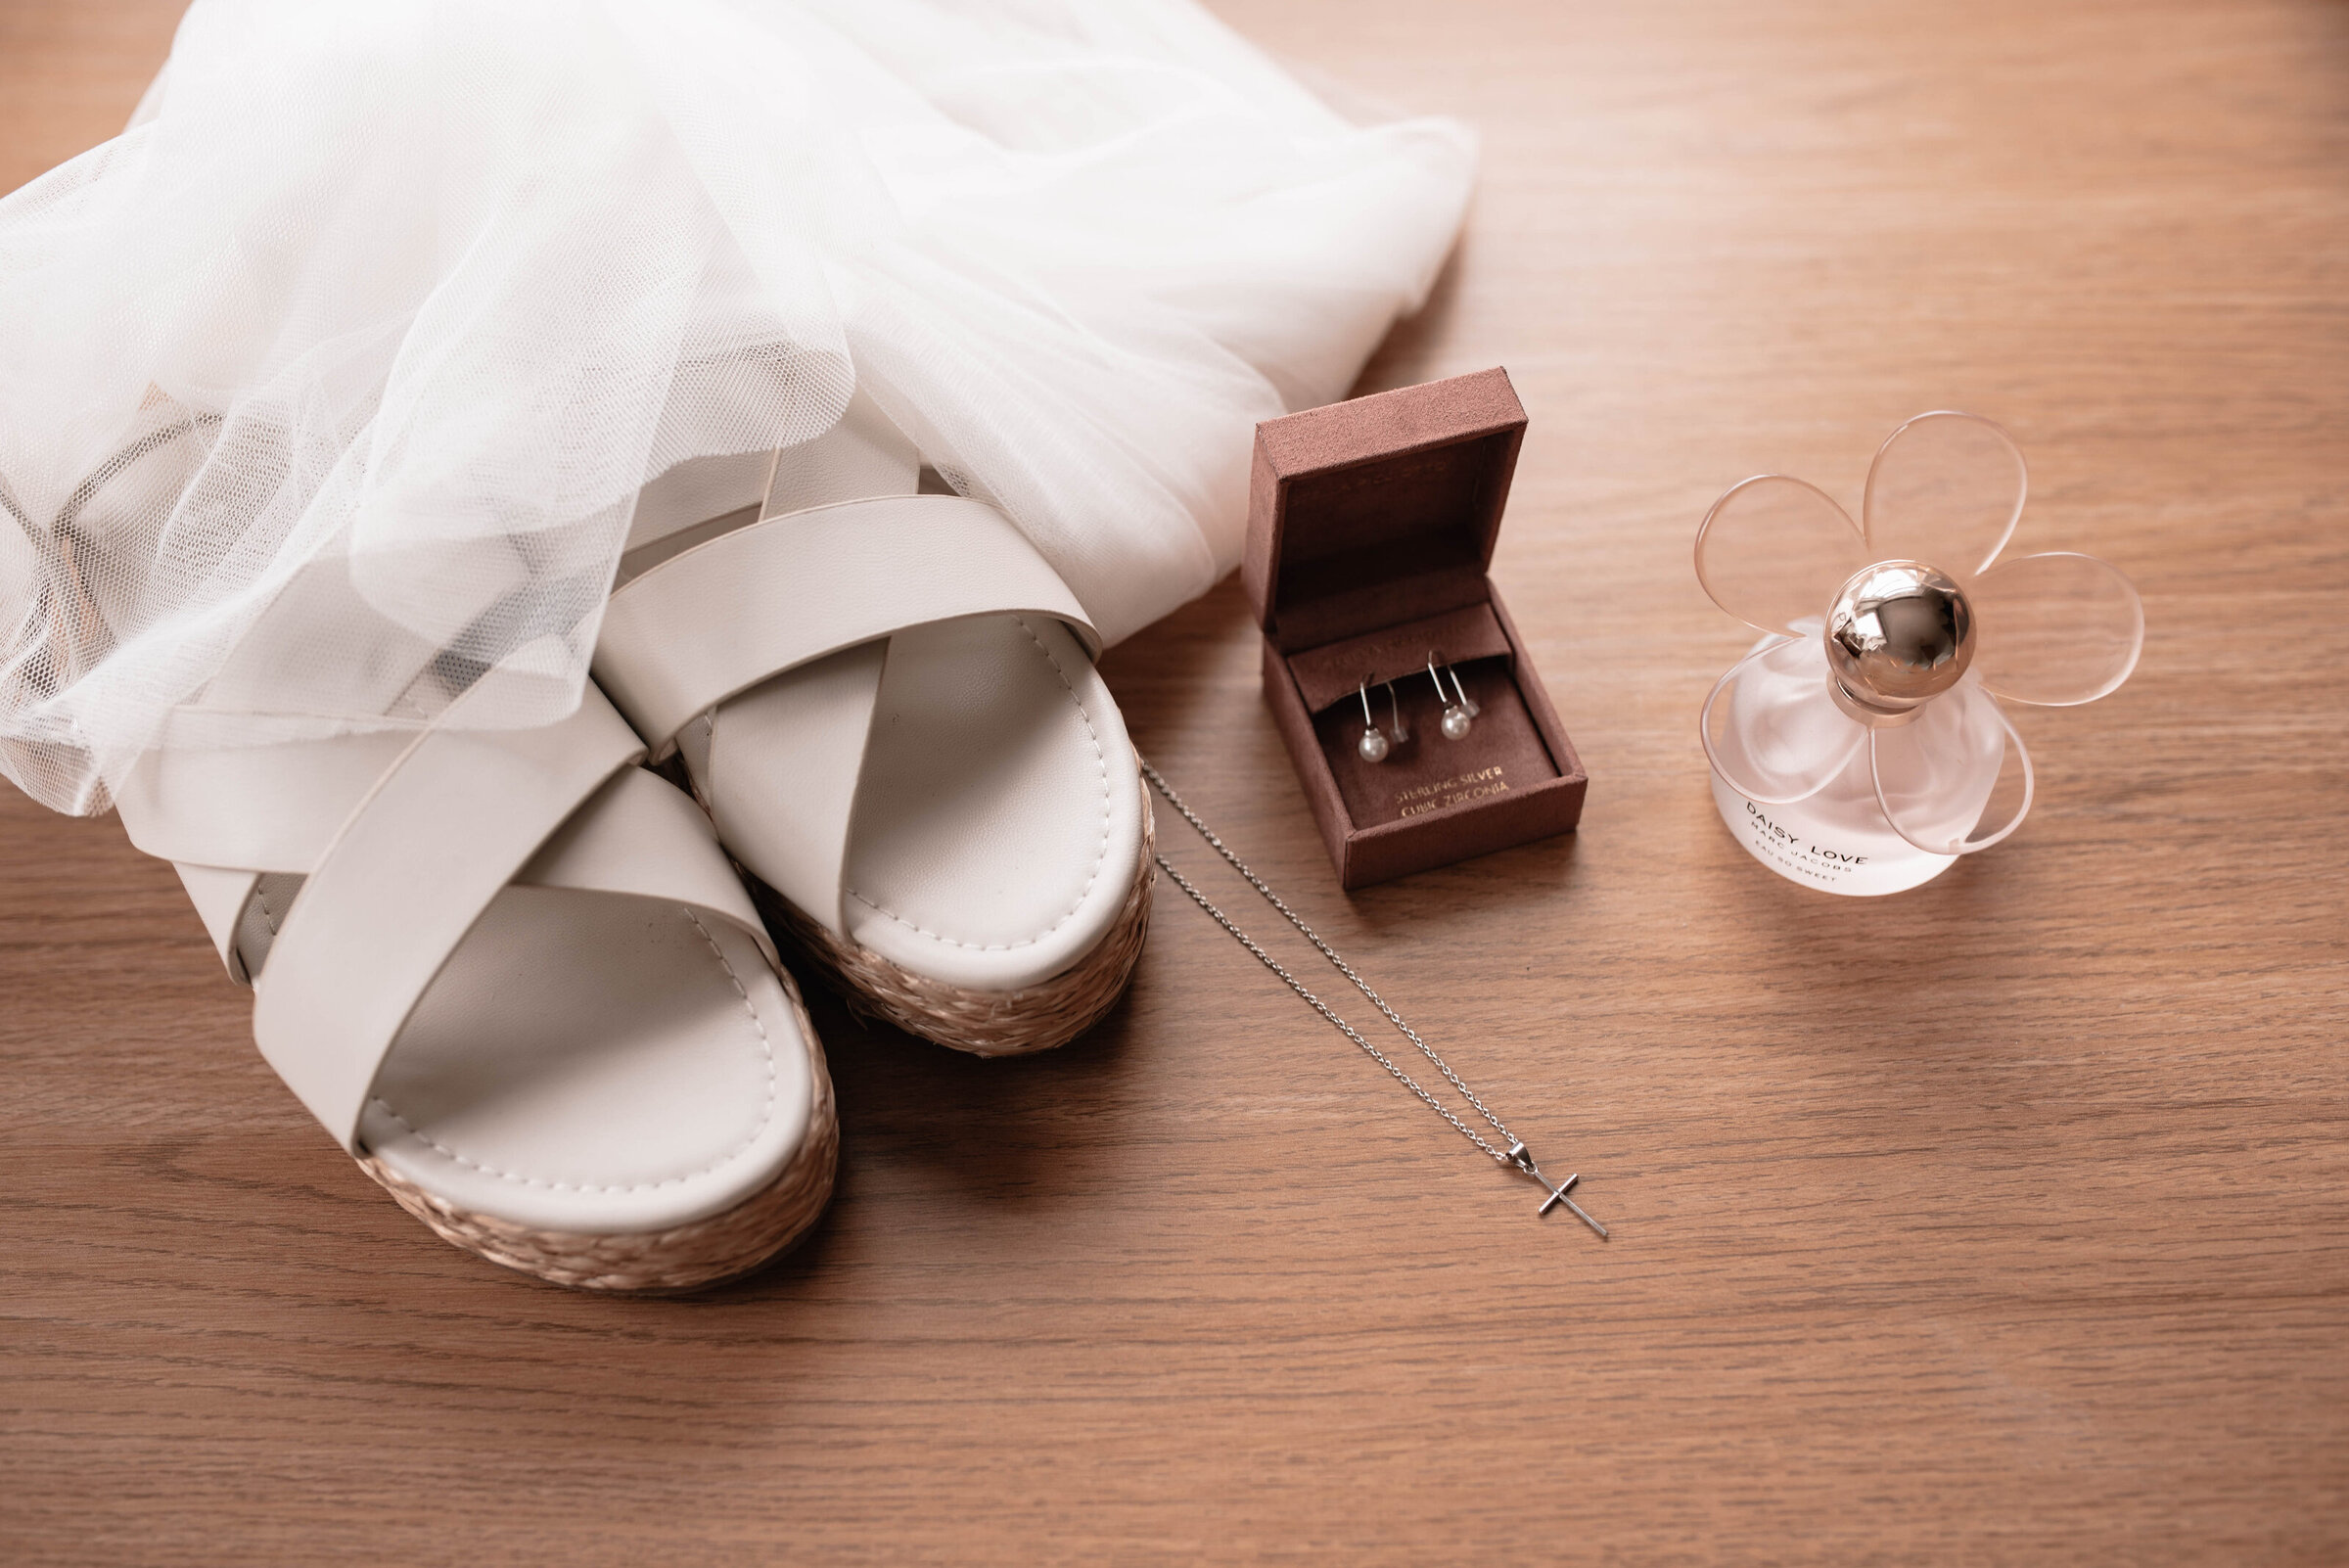 Bridal shoes with veil, jewellery and perfume on a wooden table